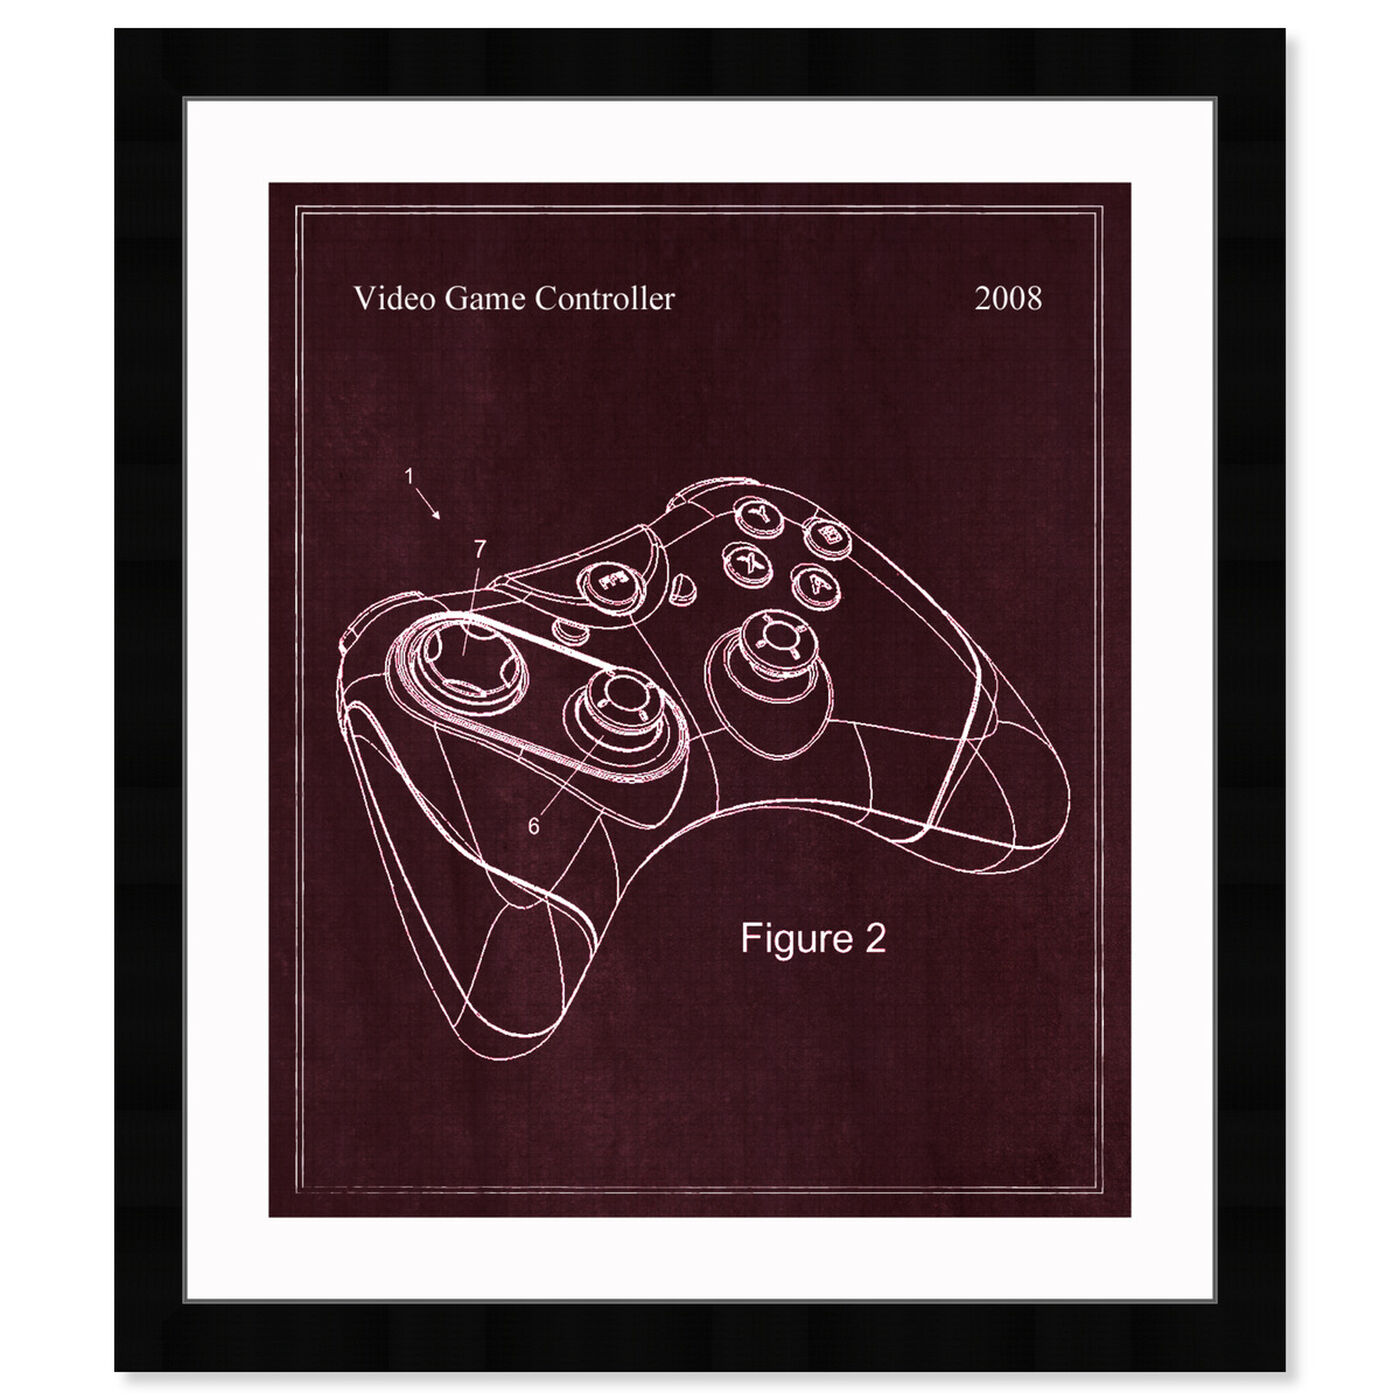 Front view of Video Game Controller, 2008 featuring entertainment and hobbies and video games art.